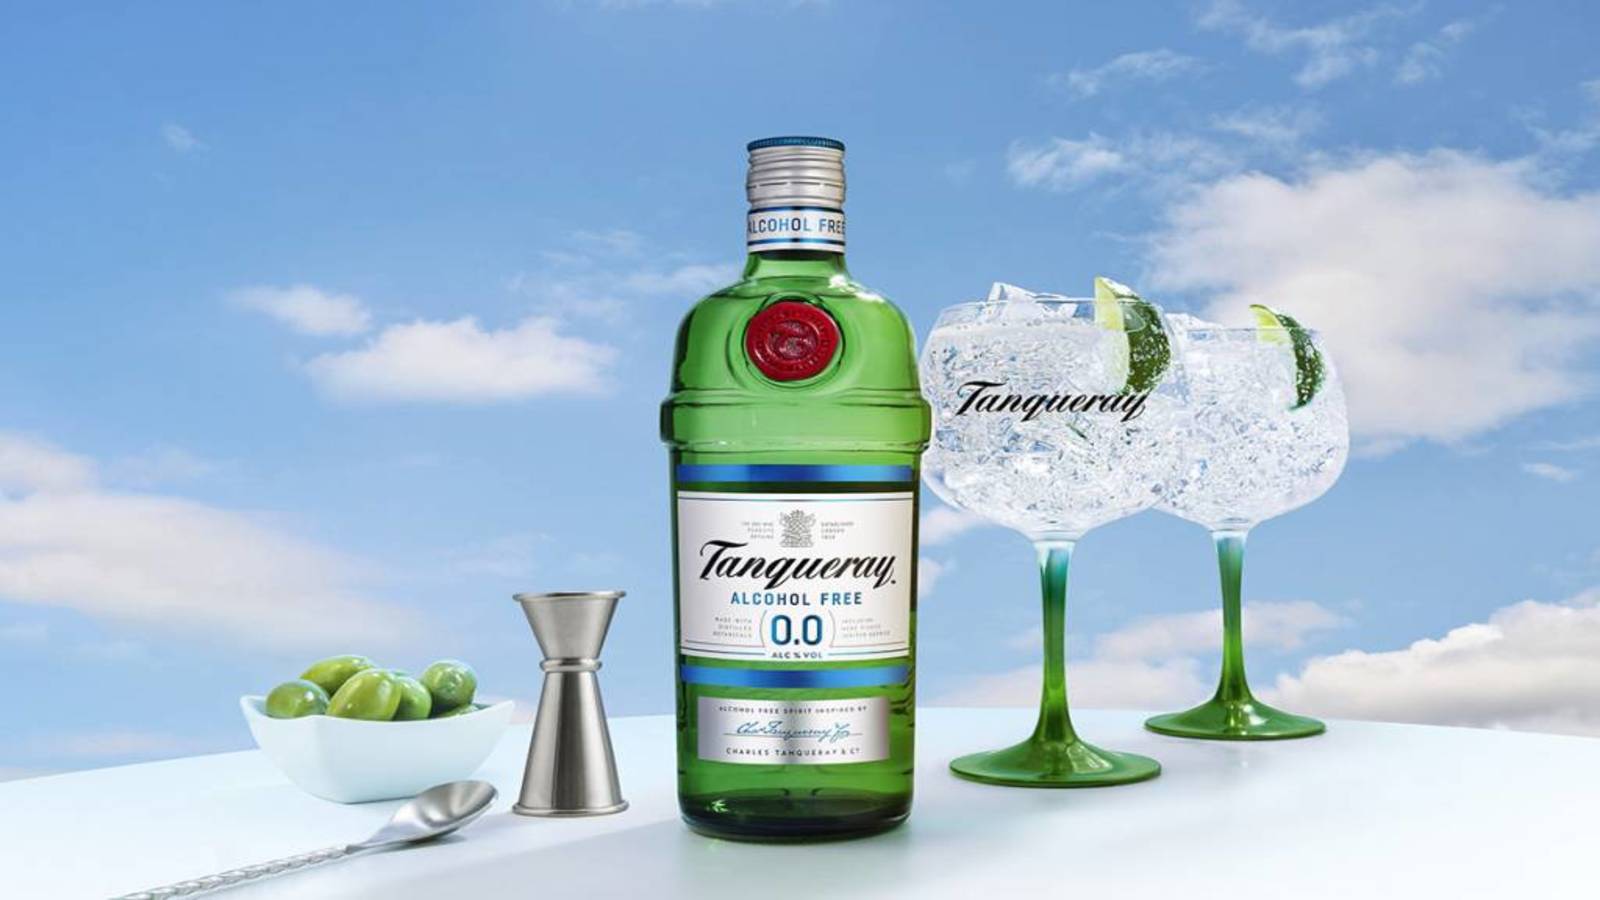 Diageo unveils alcohol-free Tanqueray gin variant to meet rising demand for low alcohol products